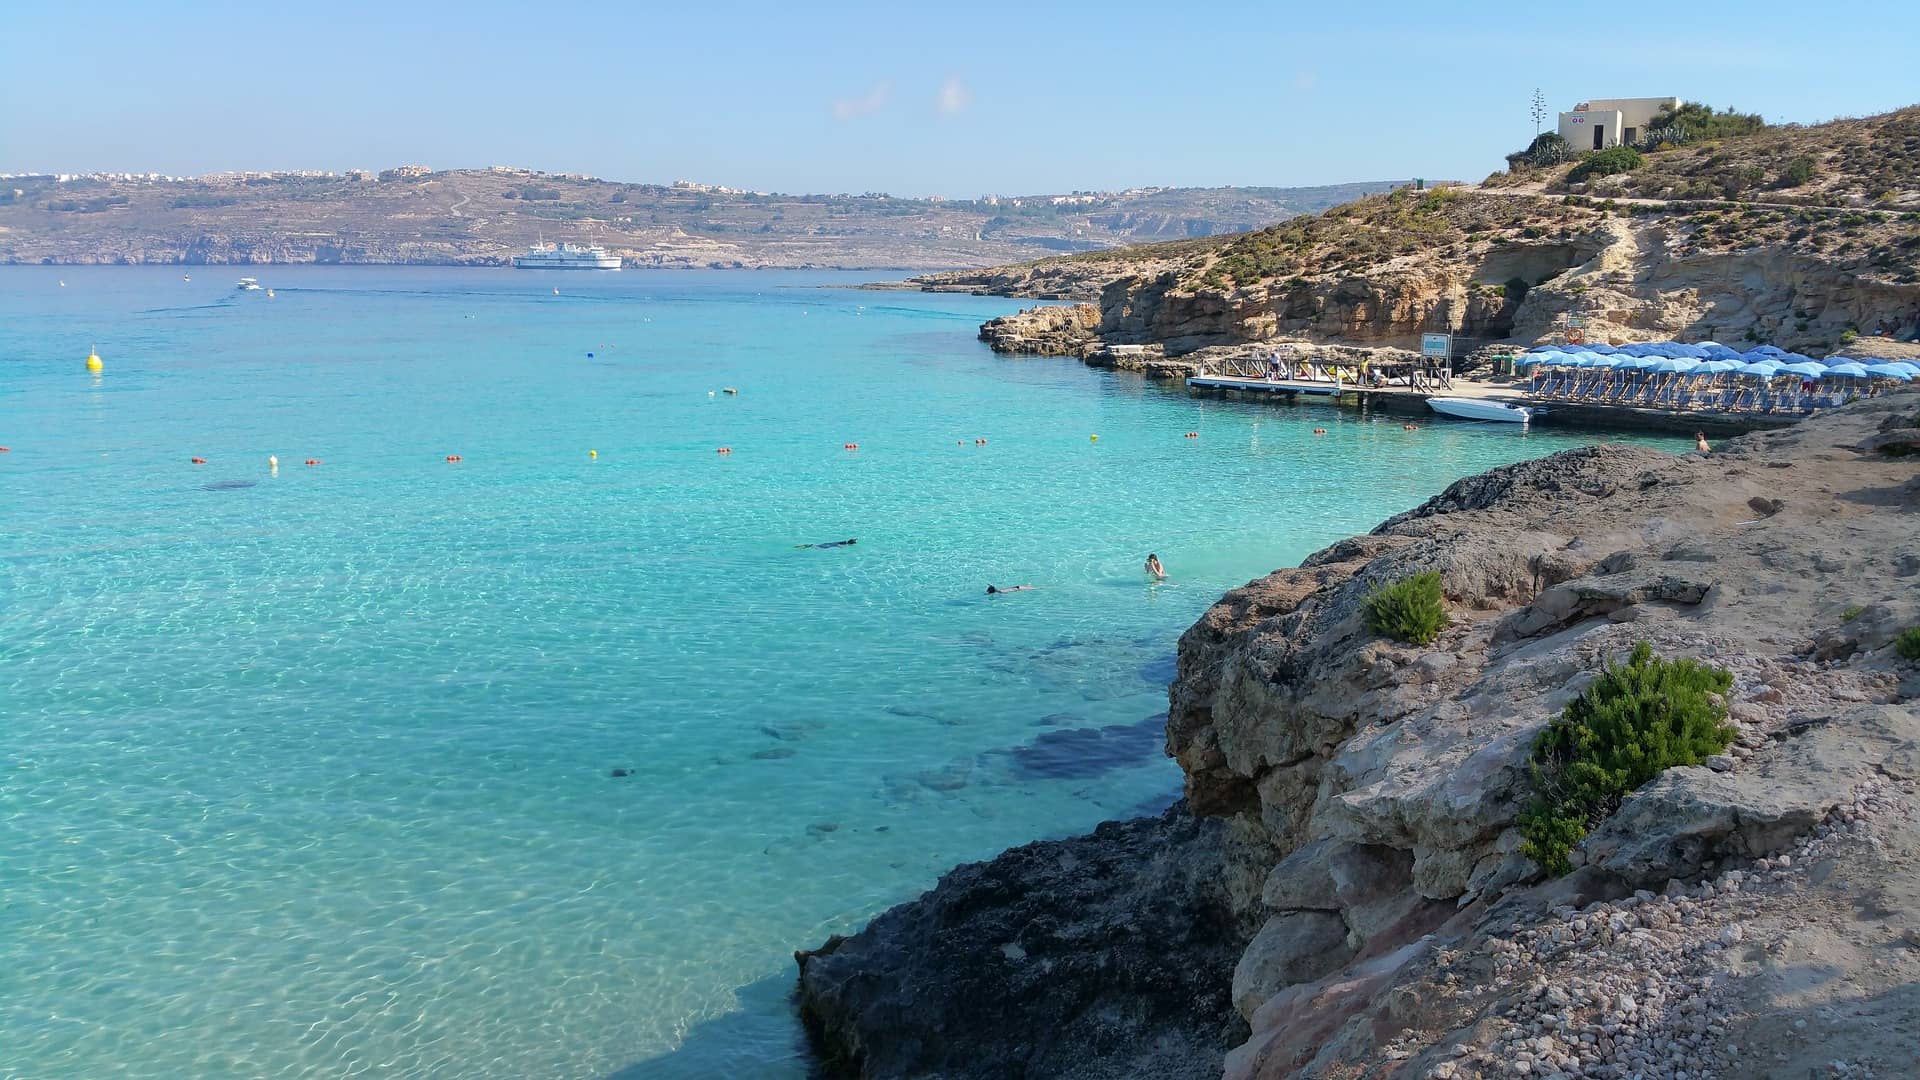 blue-lagoon-malta-comino-island-how-to-get-here-what-to-do